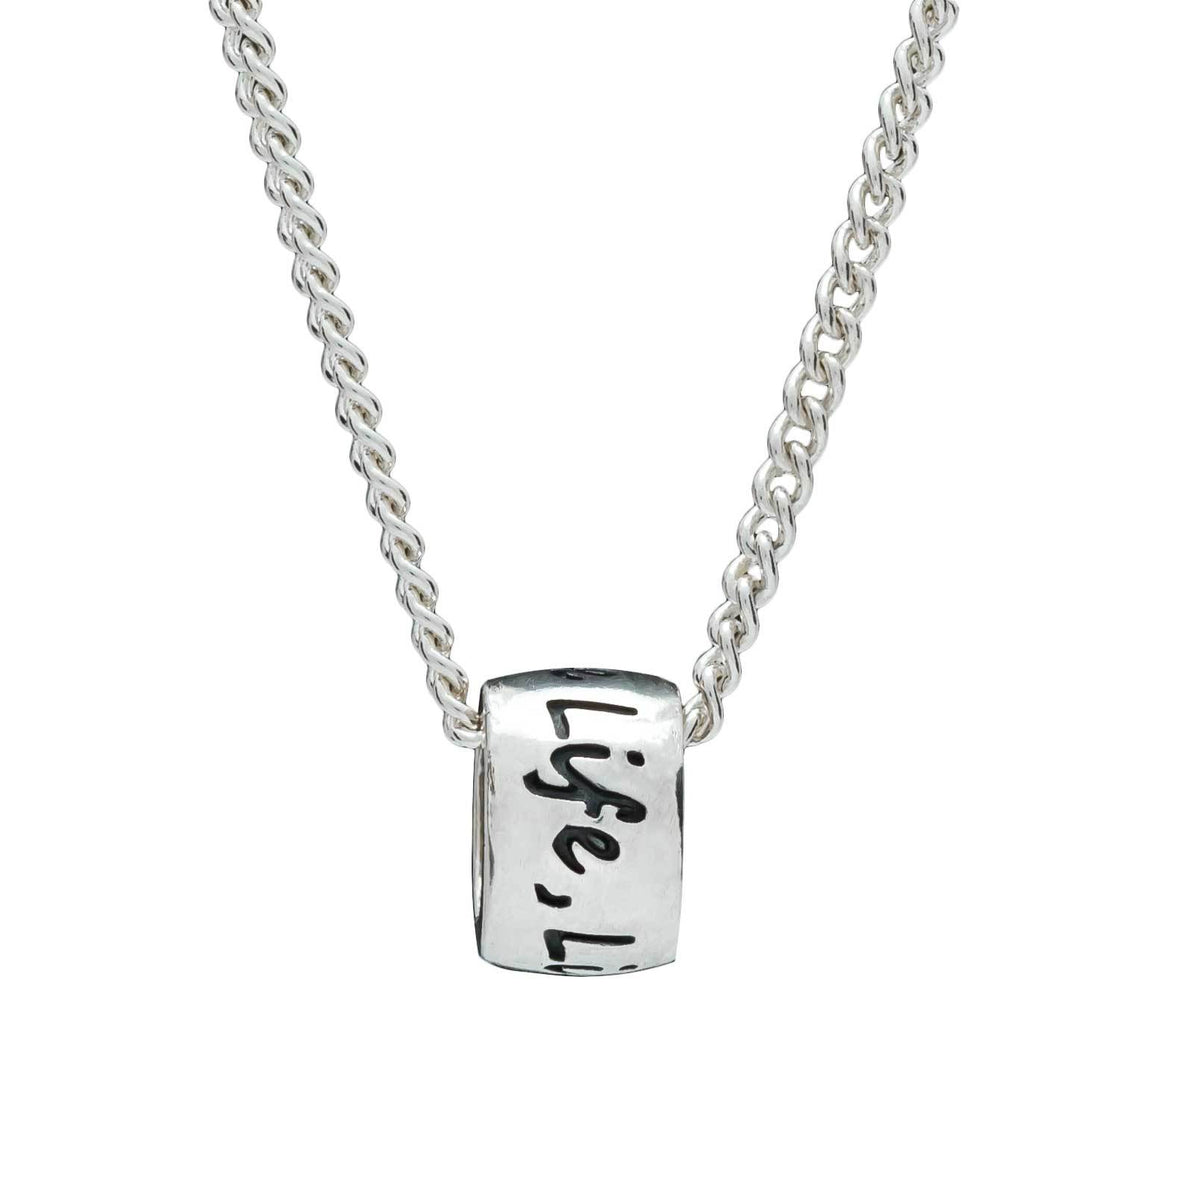 One Life, Live It! Solid Silver Adventurers and Traveler Necklace